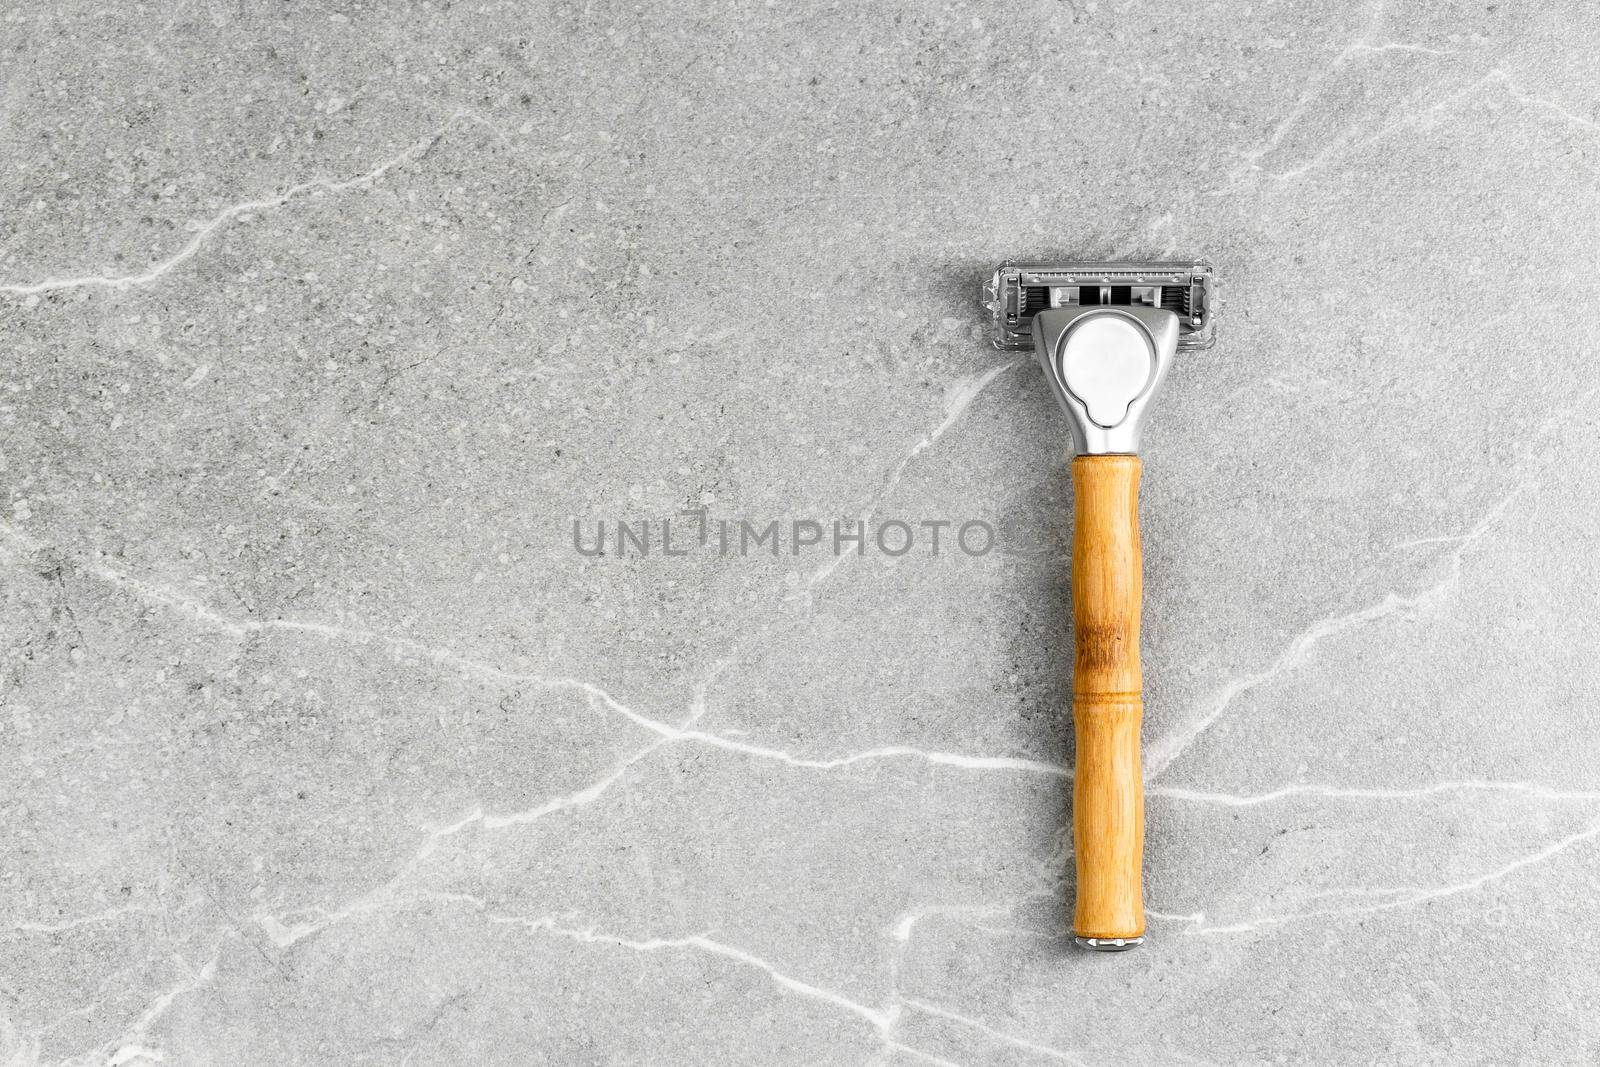 Shaving Razor with wooden handle on a grey marble background. Plastic free hygiene tool. Free space for branding